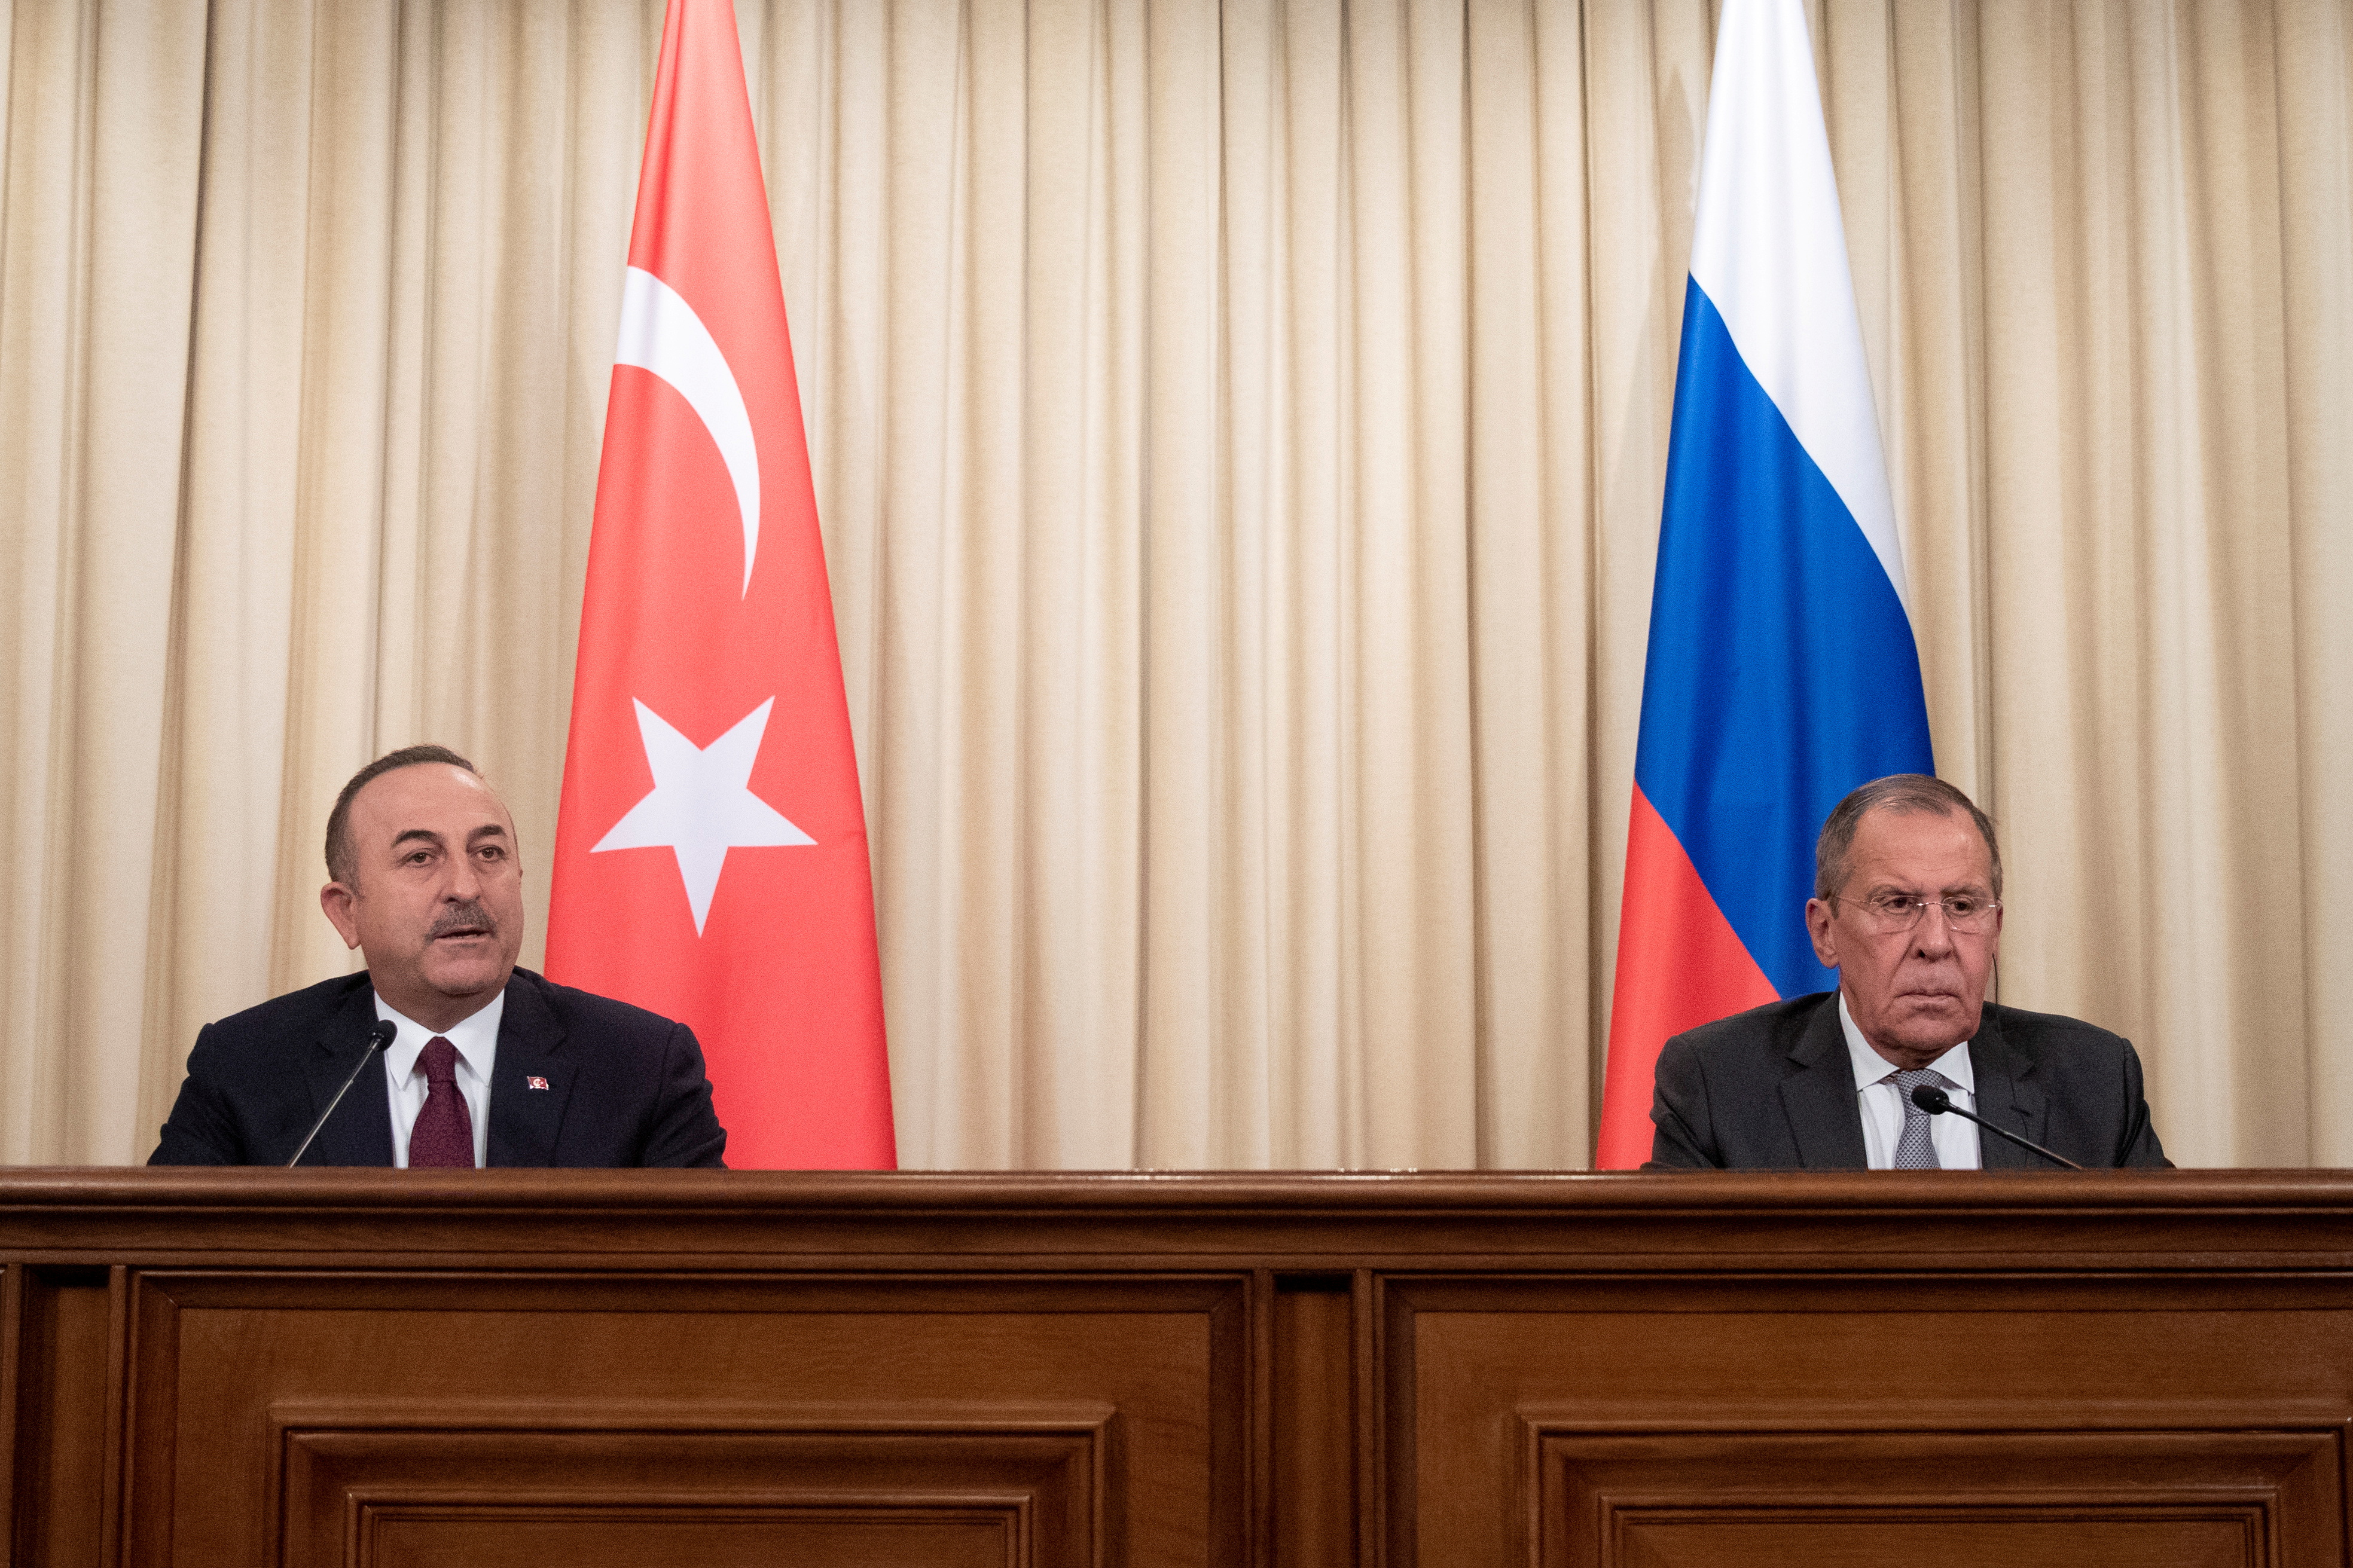 Turkish Foreign Minister Mevlut Cavusoglu and Russian Foreign Minister Sergei Lavrov attend a joint news conference following their talks in Moscow